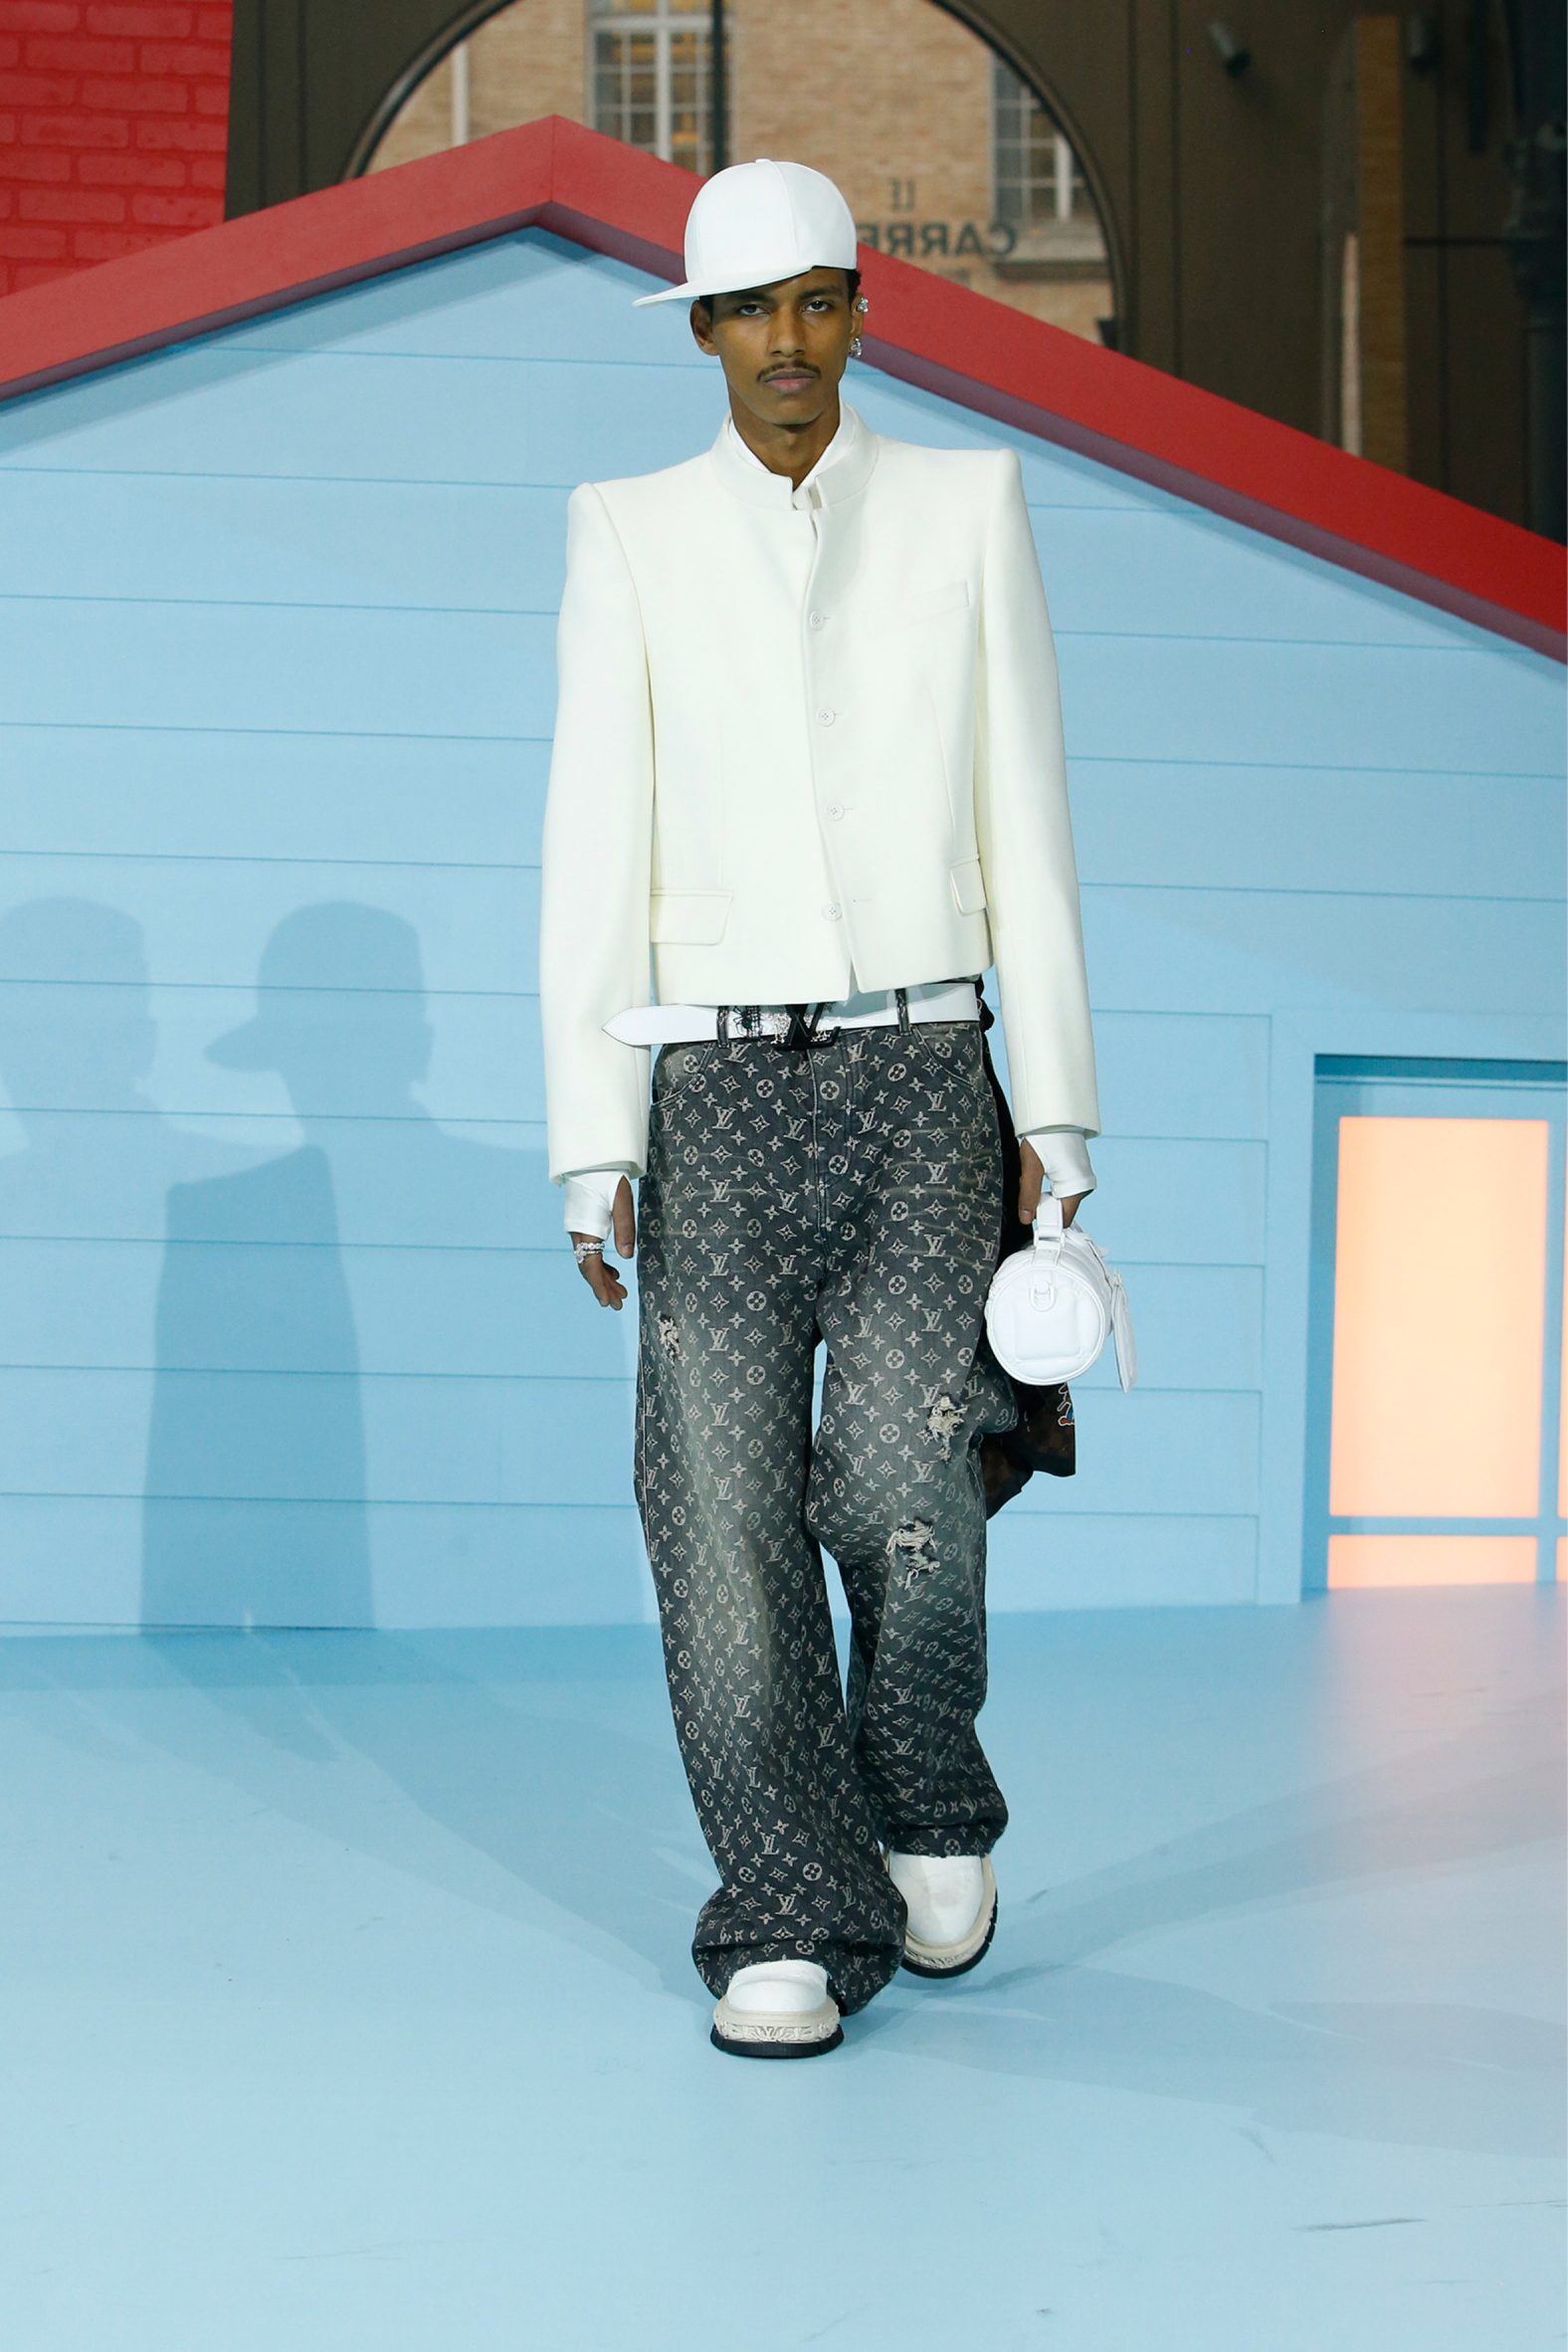 Louis Vuitton on X: #LVMenFW21 Marble abstractions. @virgilabloh 's  upcoming #LouisVuitton presentation takes place at the Tennis Club de Paris  against a modernist set. Watch live on Thursday, January 21st at 2:30